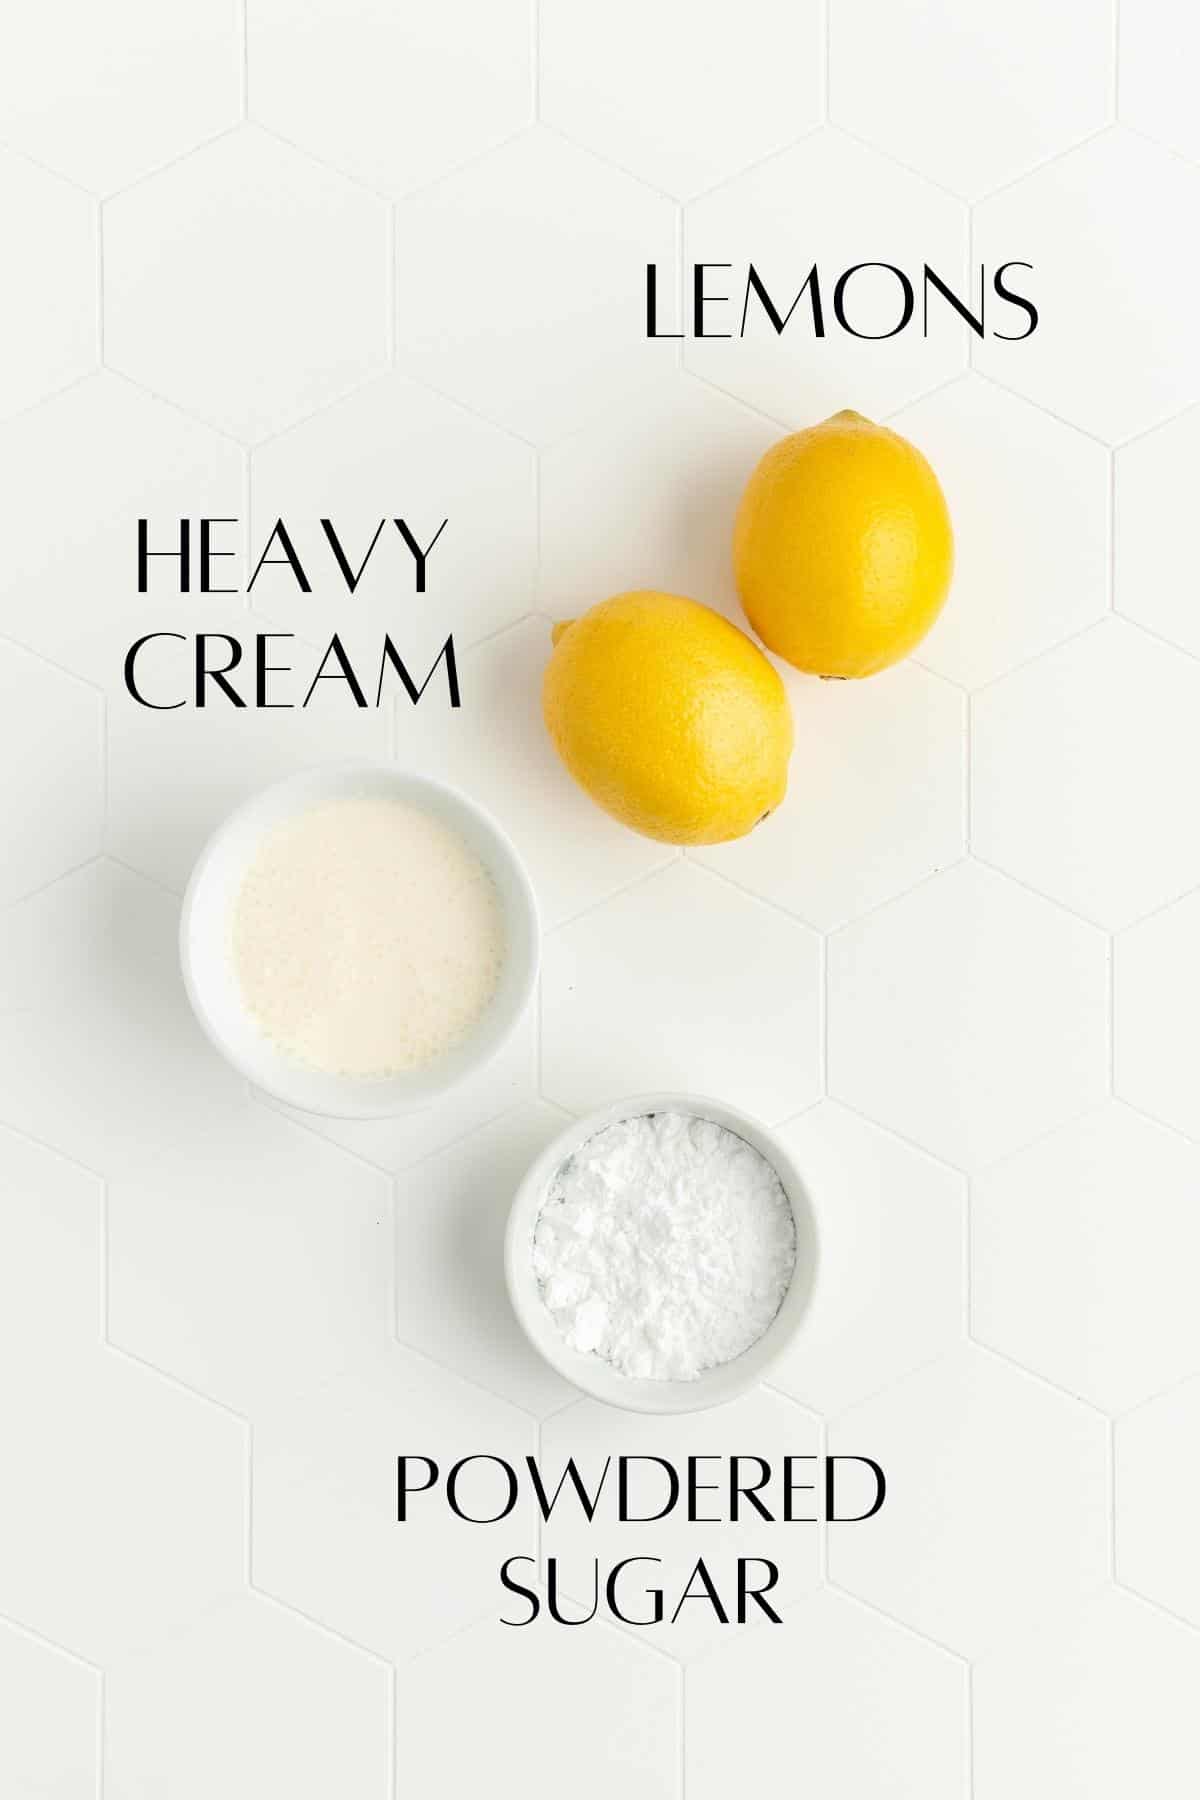 Ingredients for fresh lemon whipped cream in individual bowls on white background.